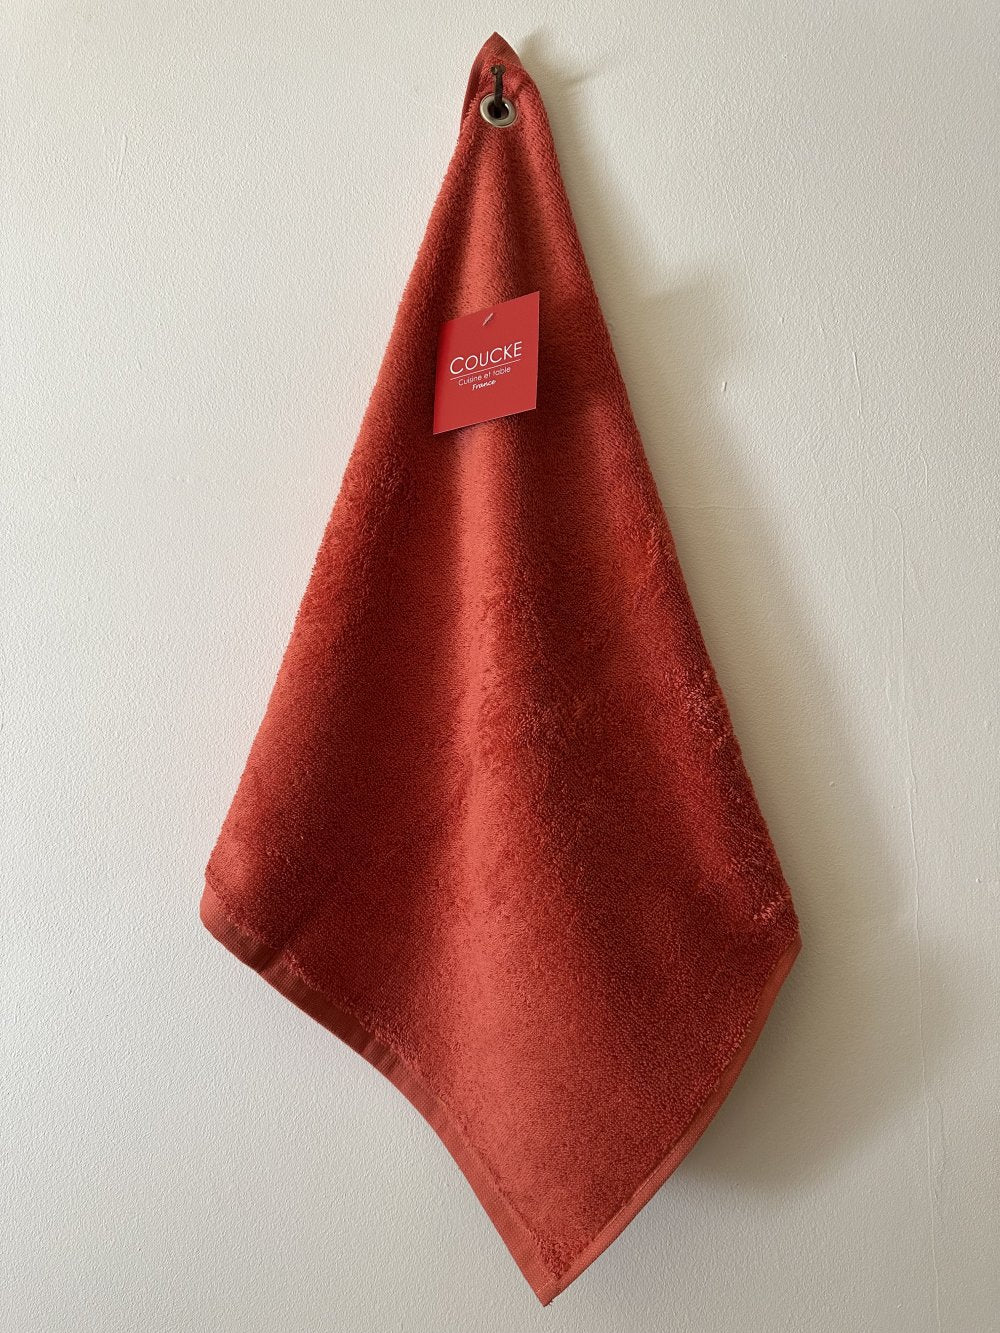 Coucke "Rooibos Eyelet", Cotton terry hand towel. Designed in France.